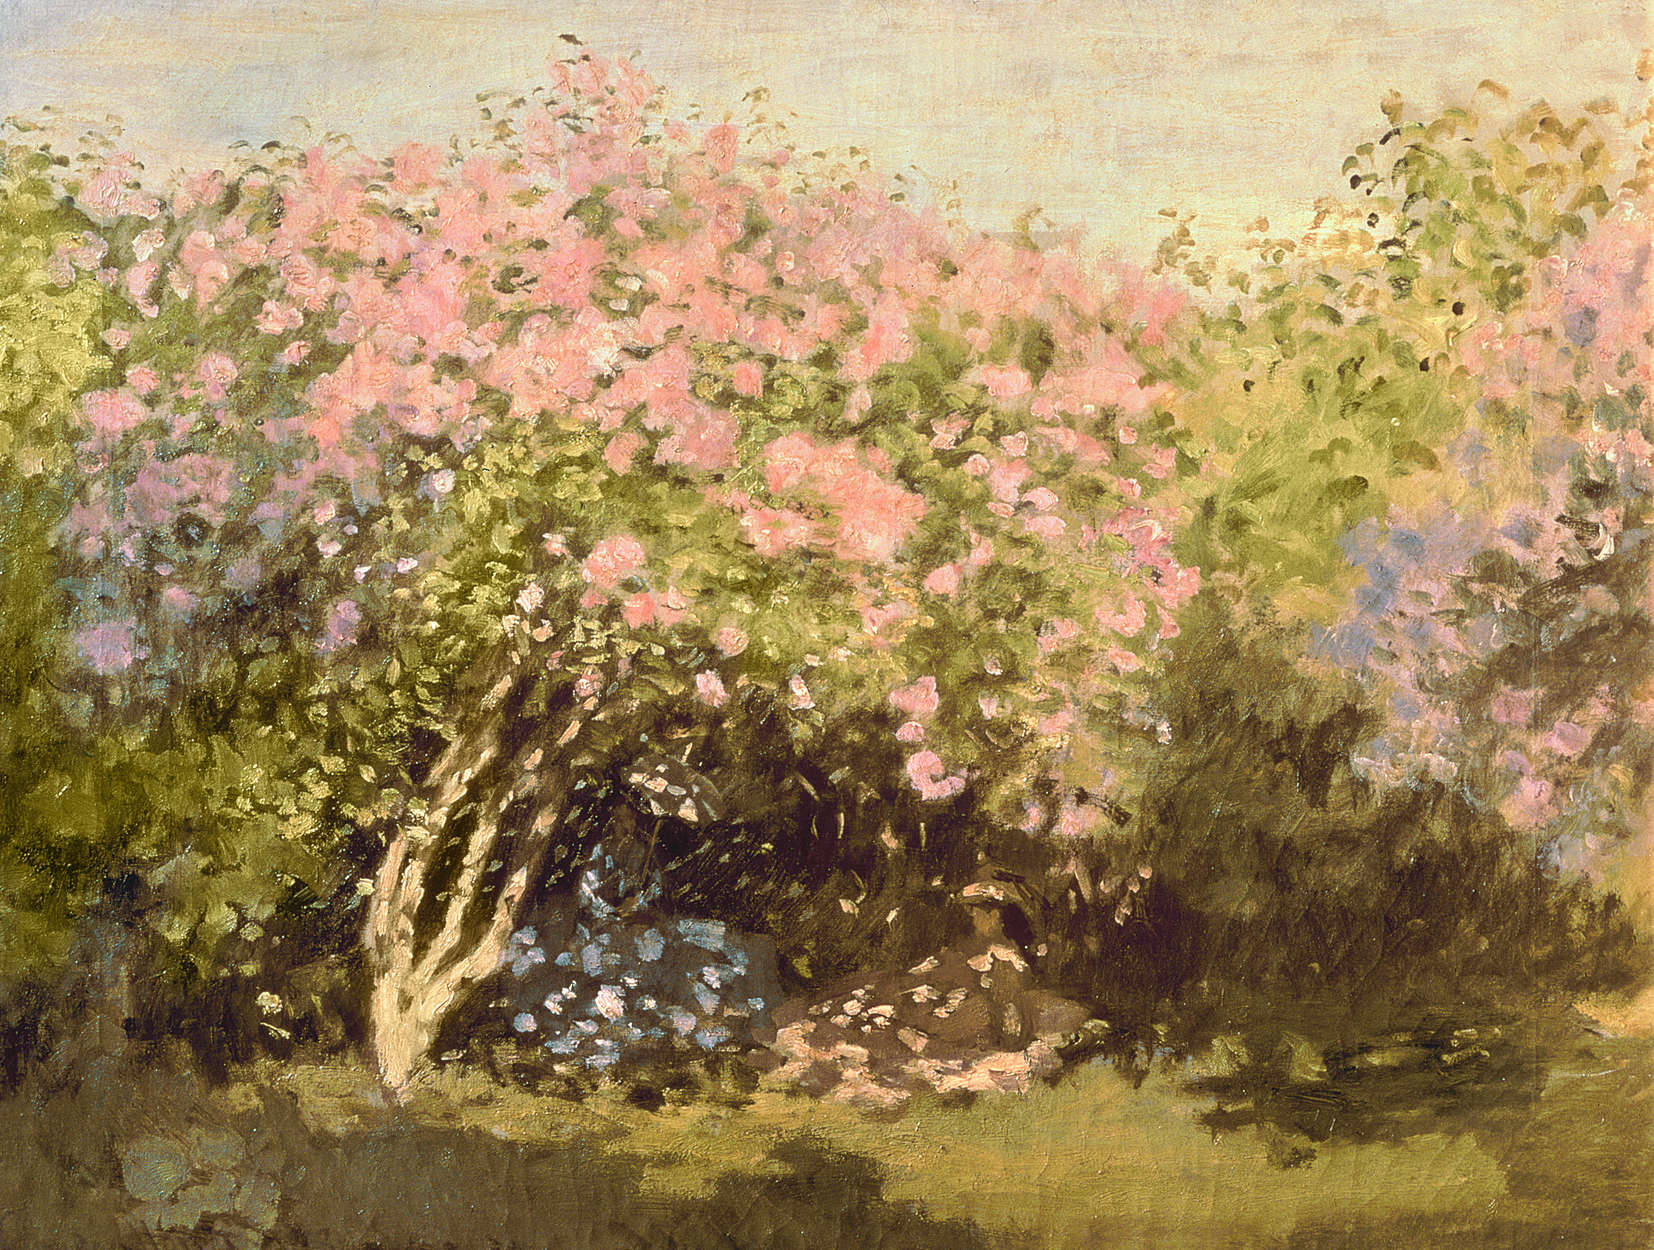             Photo wallpaper "Lilac in bloom in the sun" by Claude Monet
        